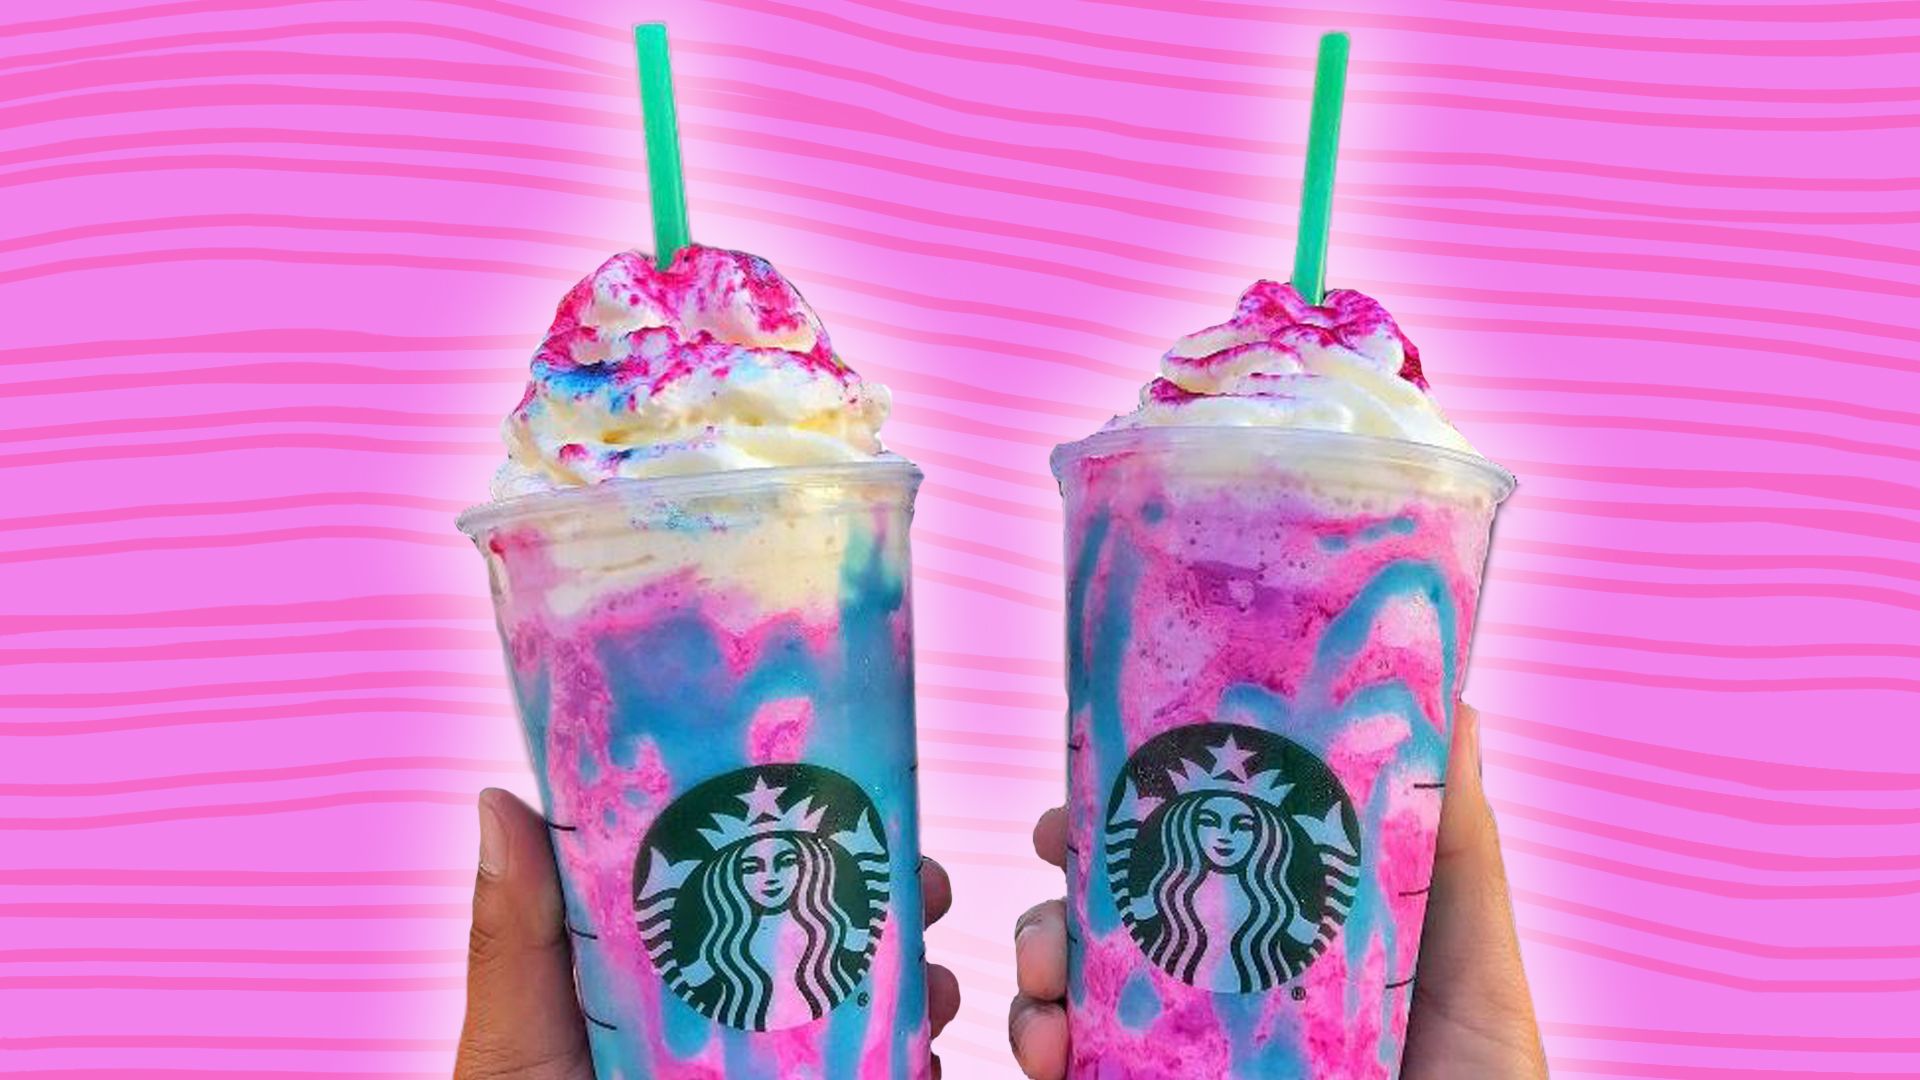 Starbucks is being sued over the Unicorn Frappuccino